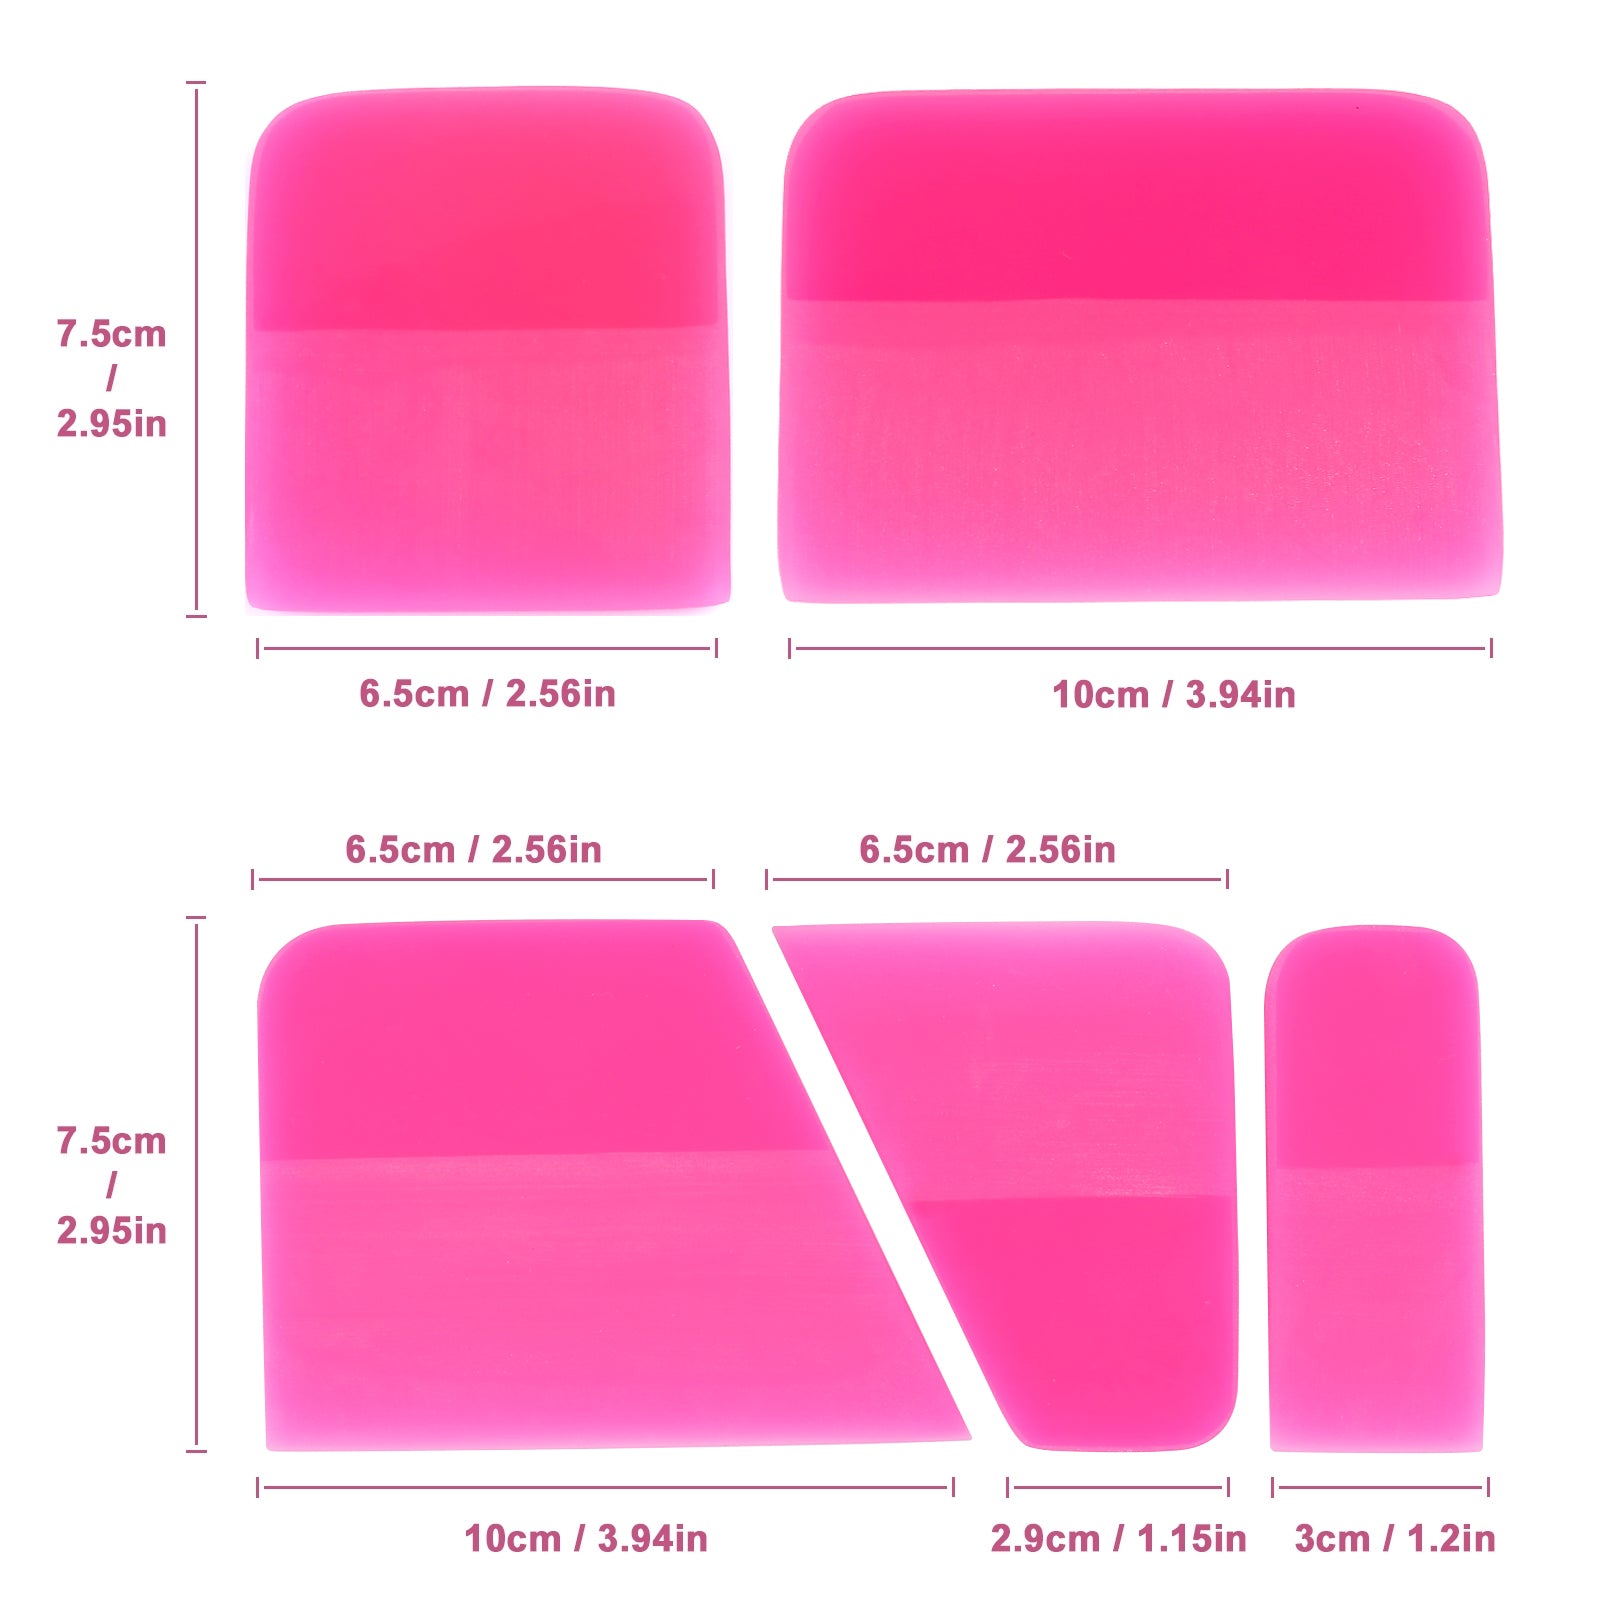 A pink round edge PPF squeegee from the kit, focused on the soft edge for bubble-free PPF installations. with sizes